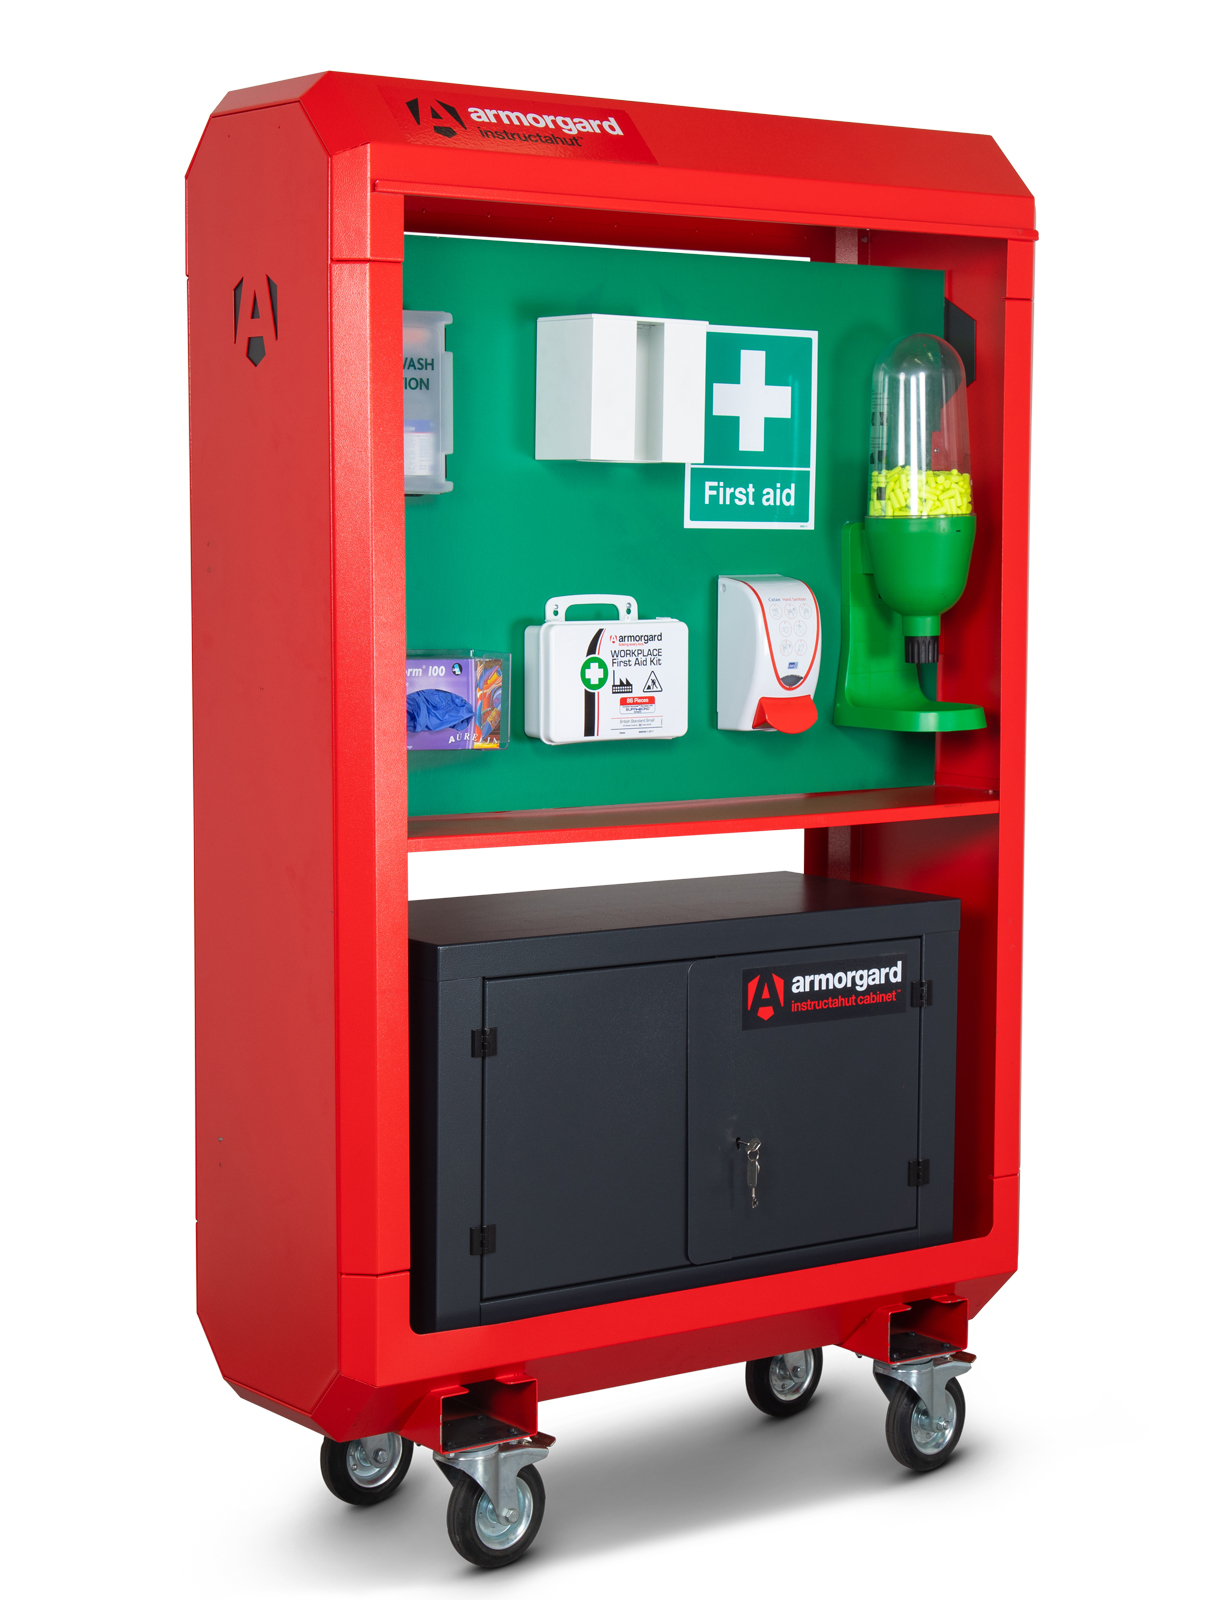 IH4 front left first aid kit cabinet shut